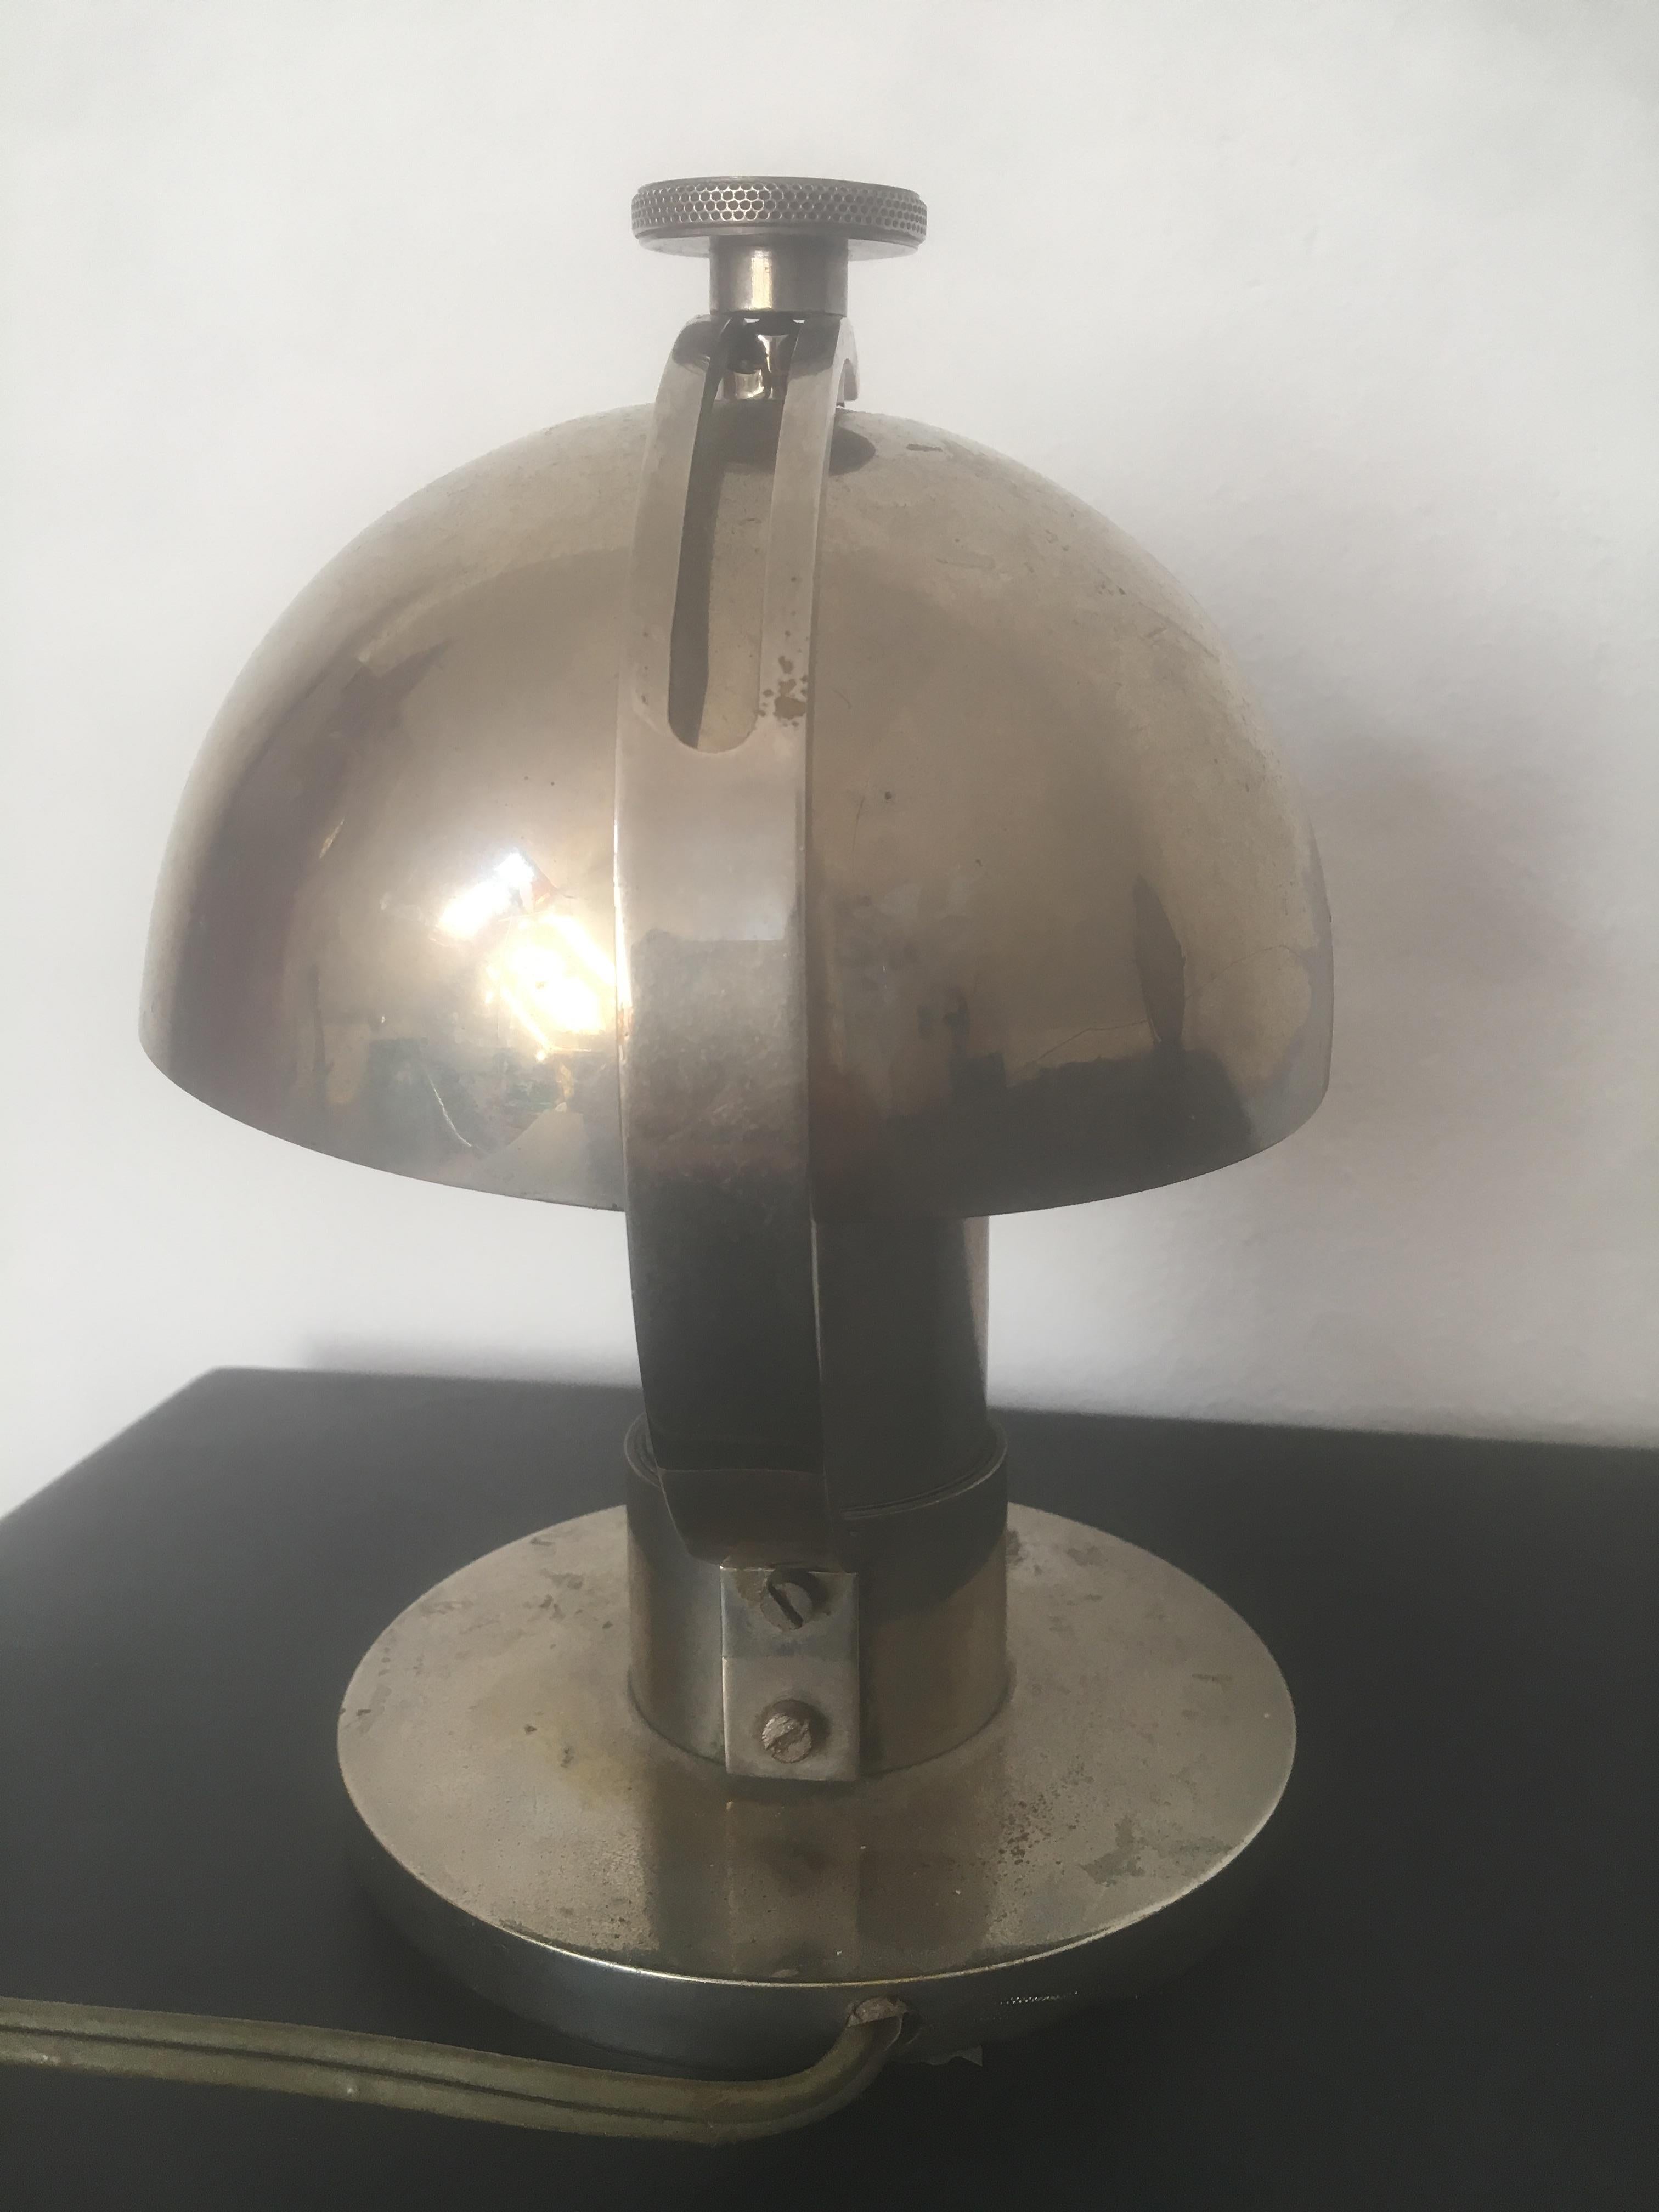 Maison Desny Art Deco Modernist Nickeled Metal Table Lamp, French, 1930s For Sale 1